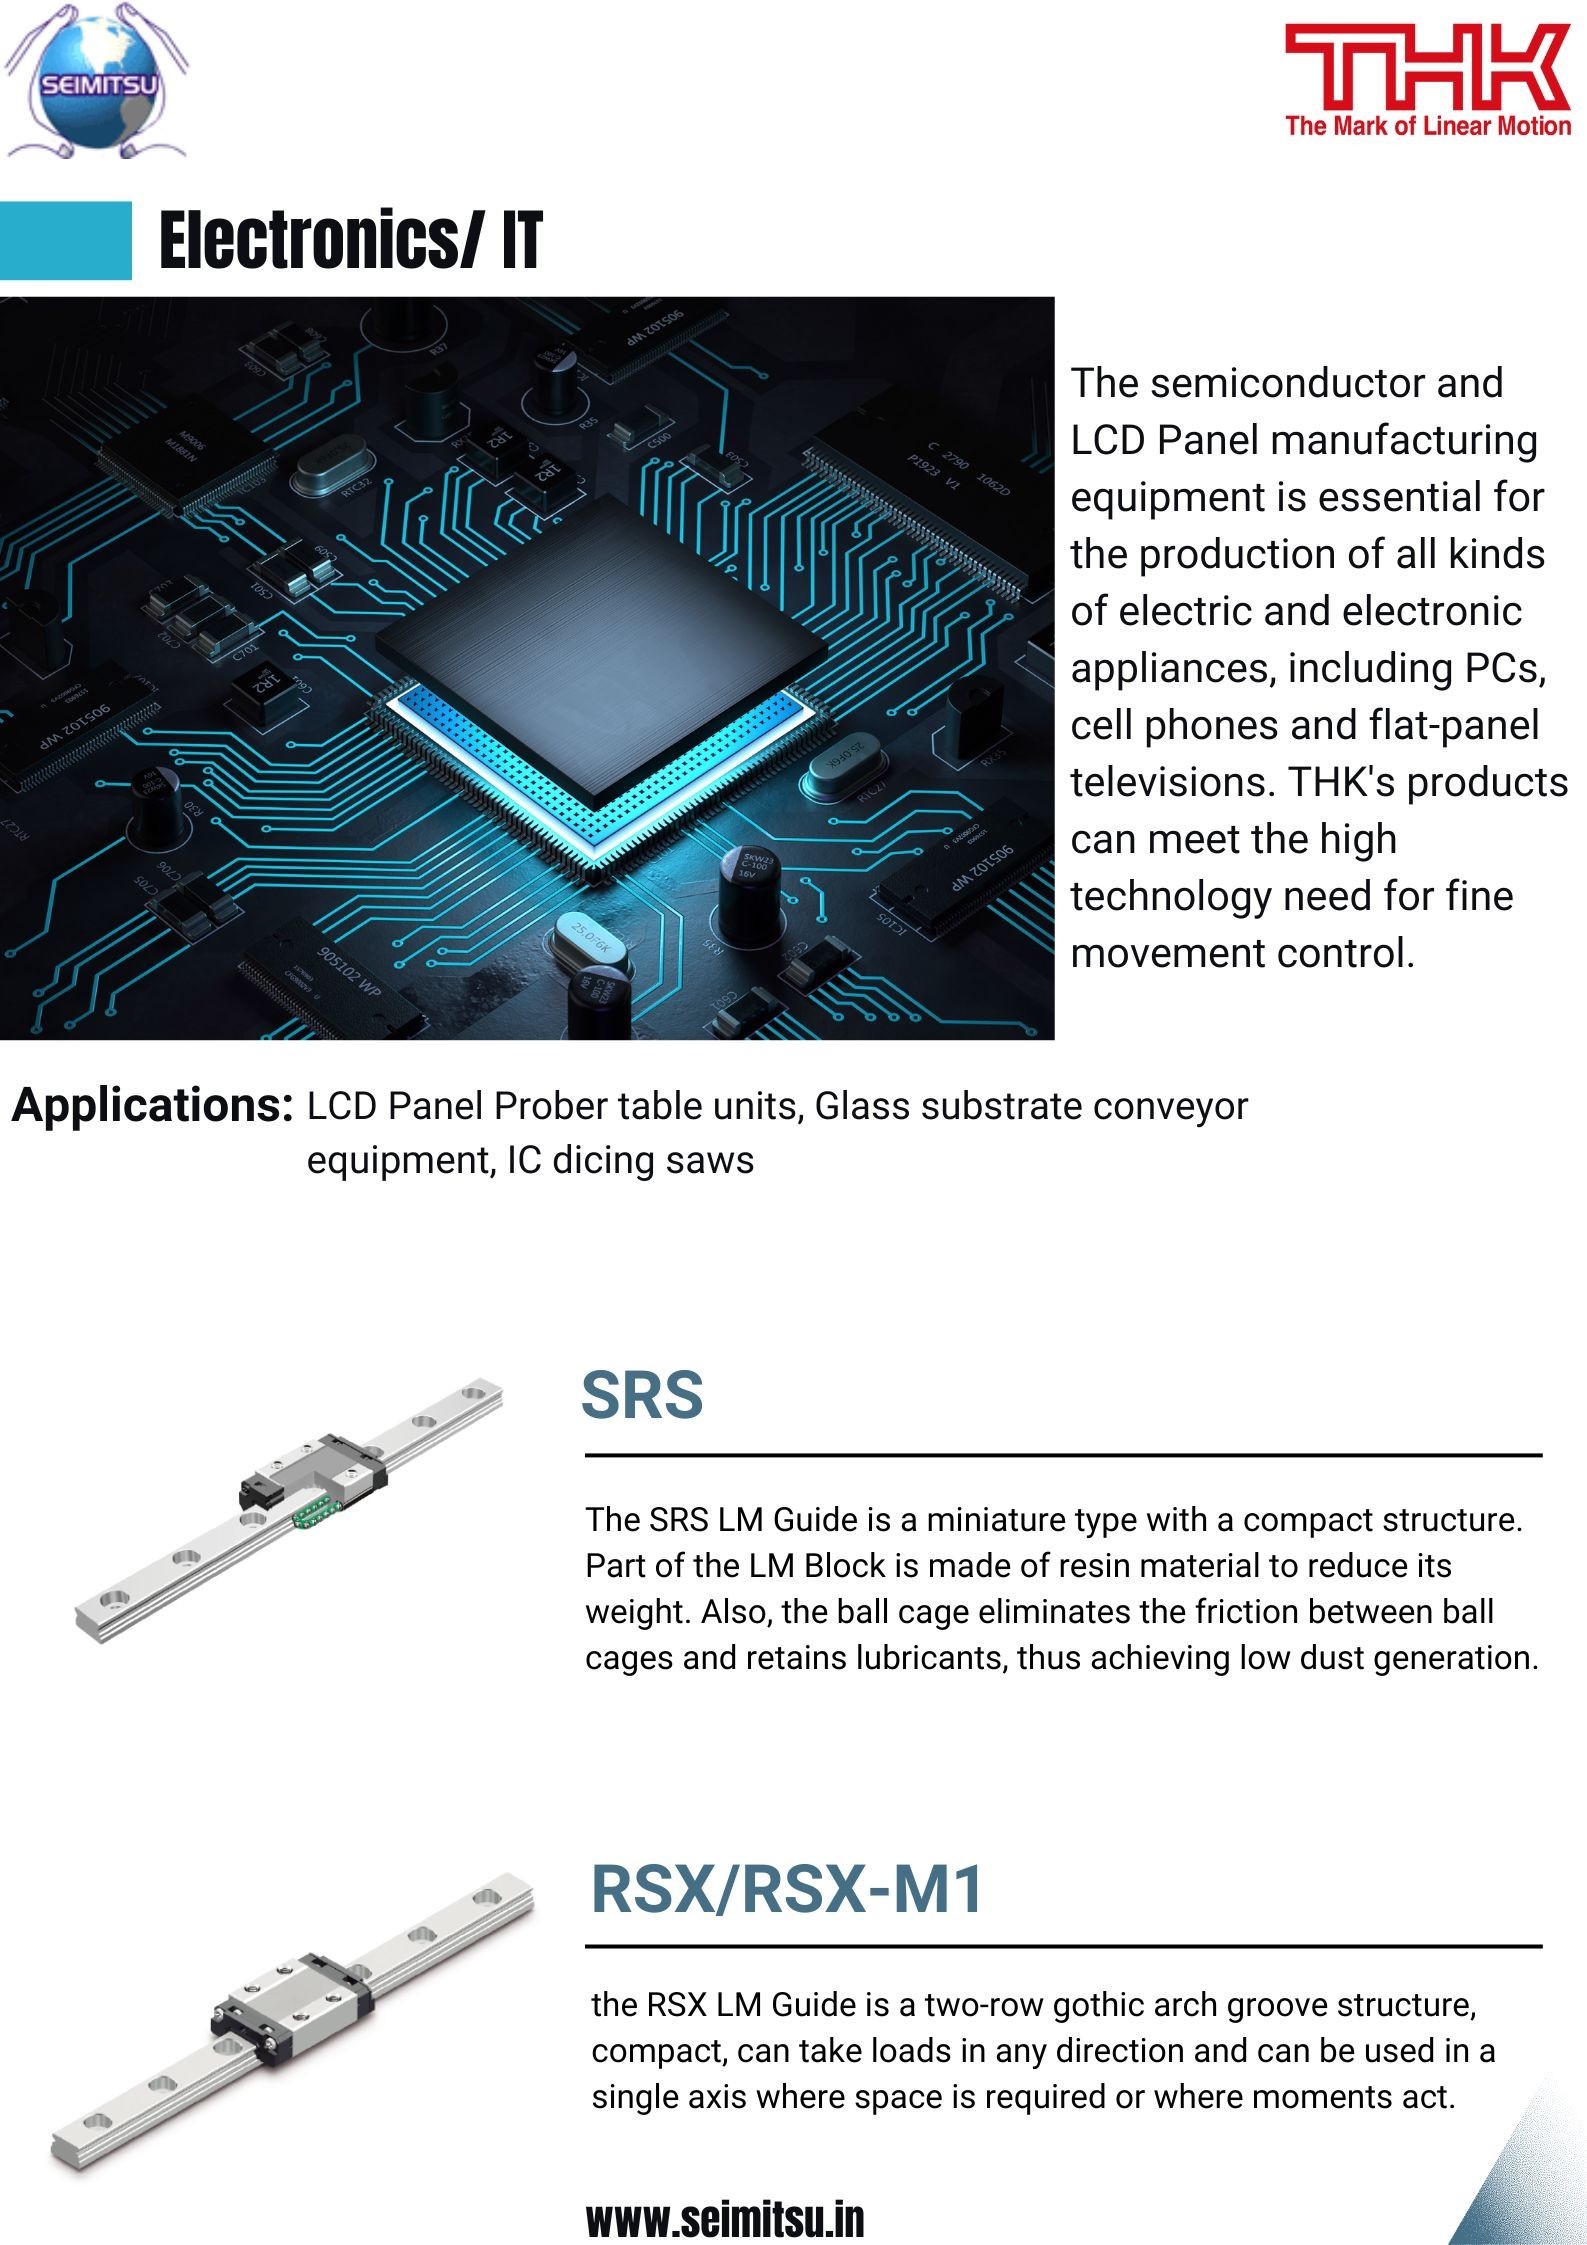 THK LM Guide SRS uses in Semiconductor Industry | SEIMITSU Factory Automation Pvt. Ltd. 